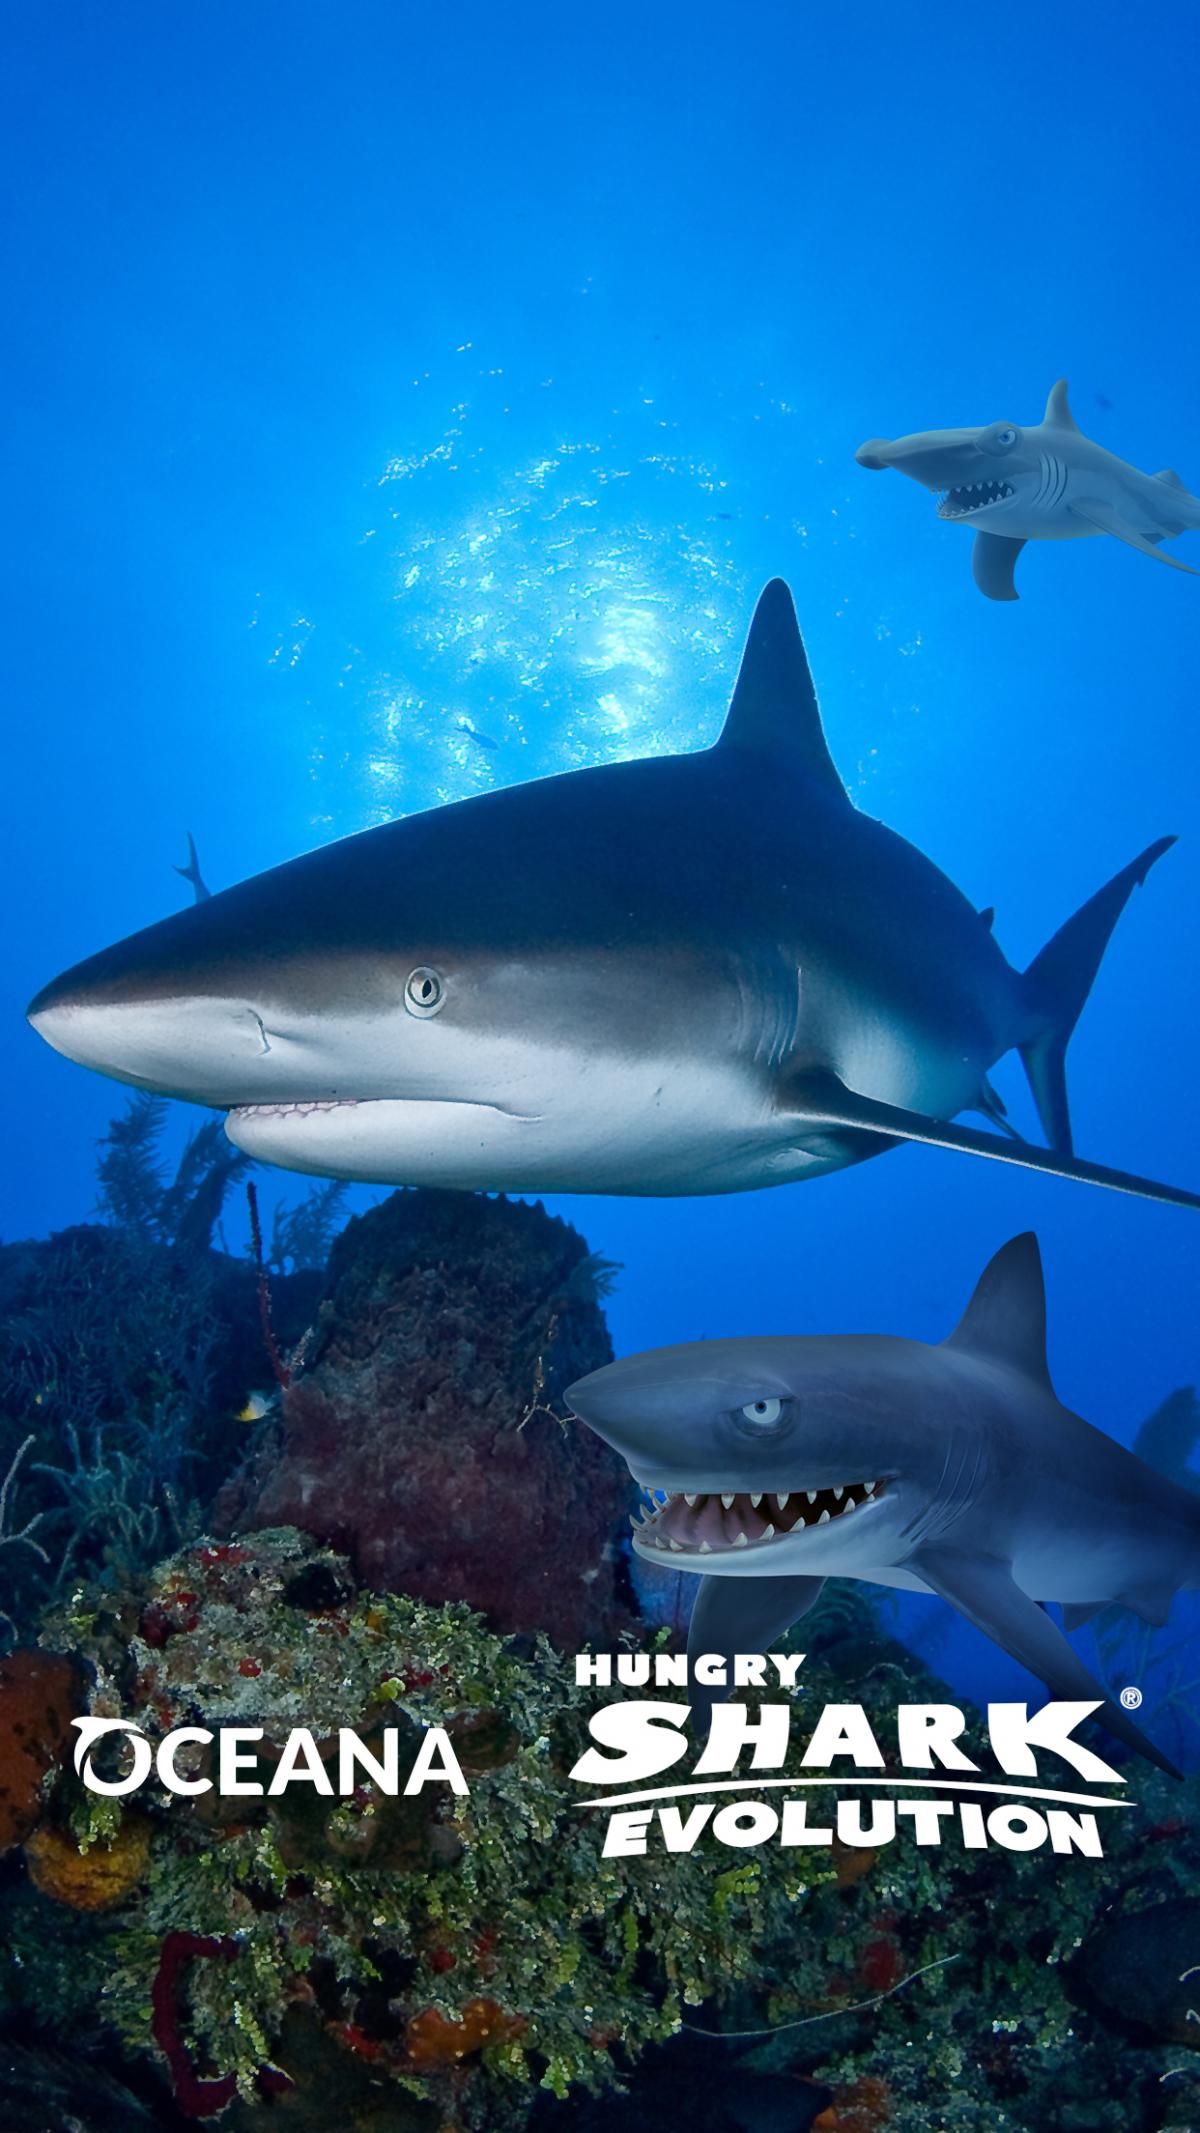 Thank you for helping to protect our oceans, Hungry Shark